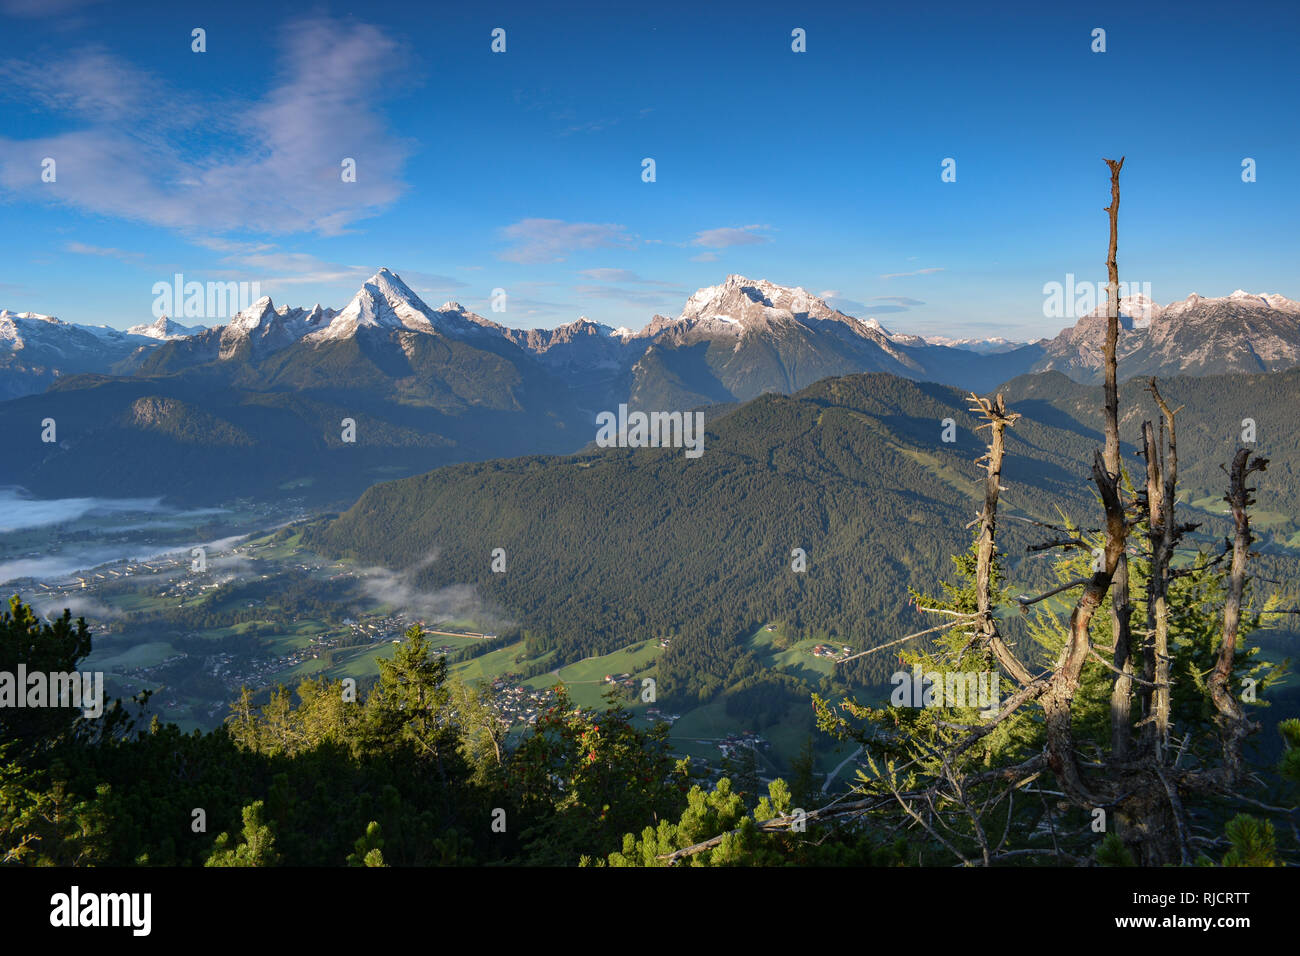 early morning view of Berchtesgaden with mountains Watzmann and ...